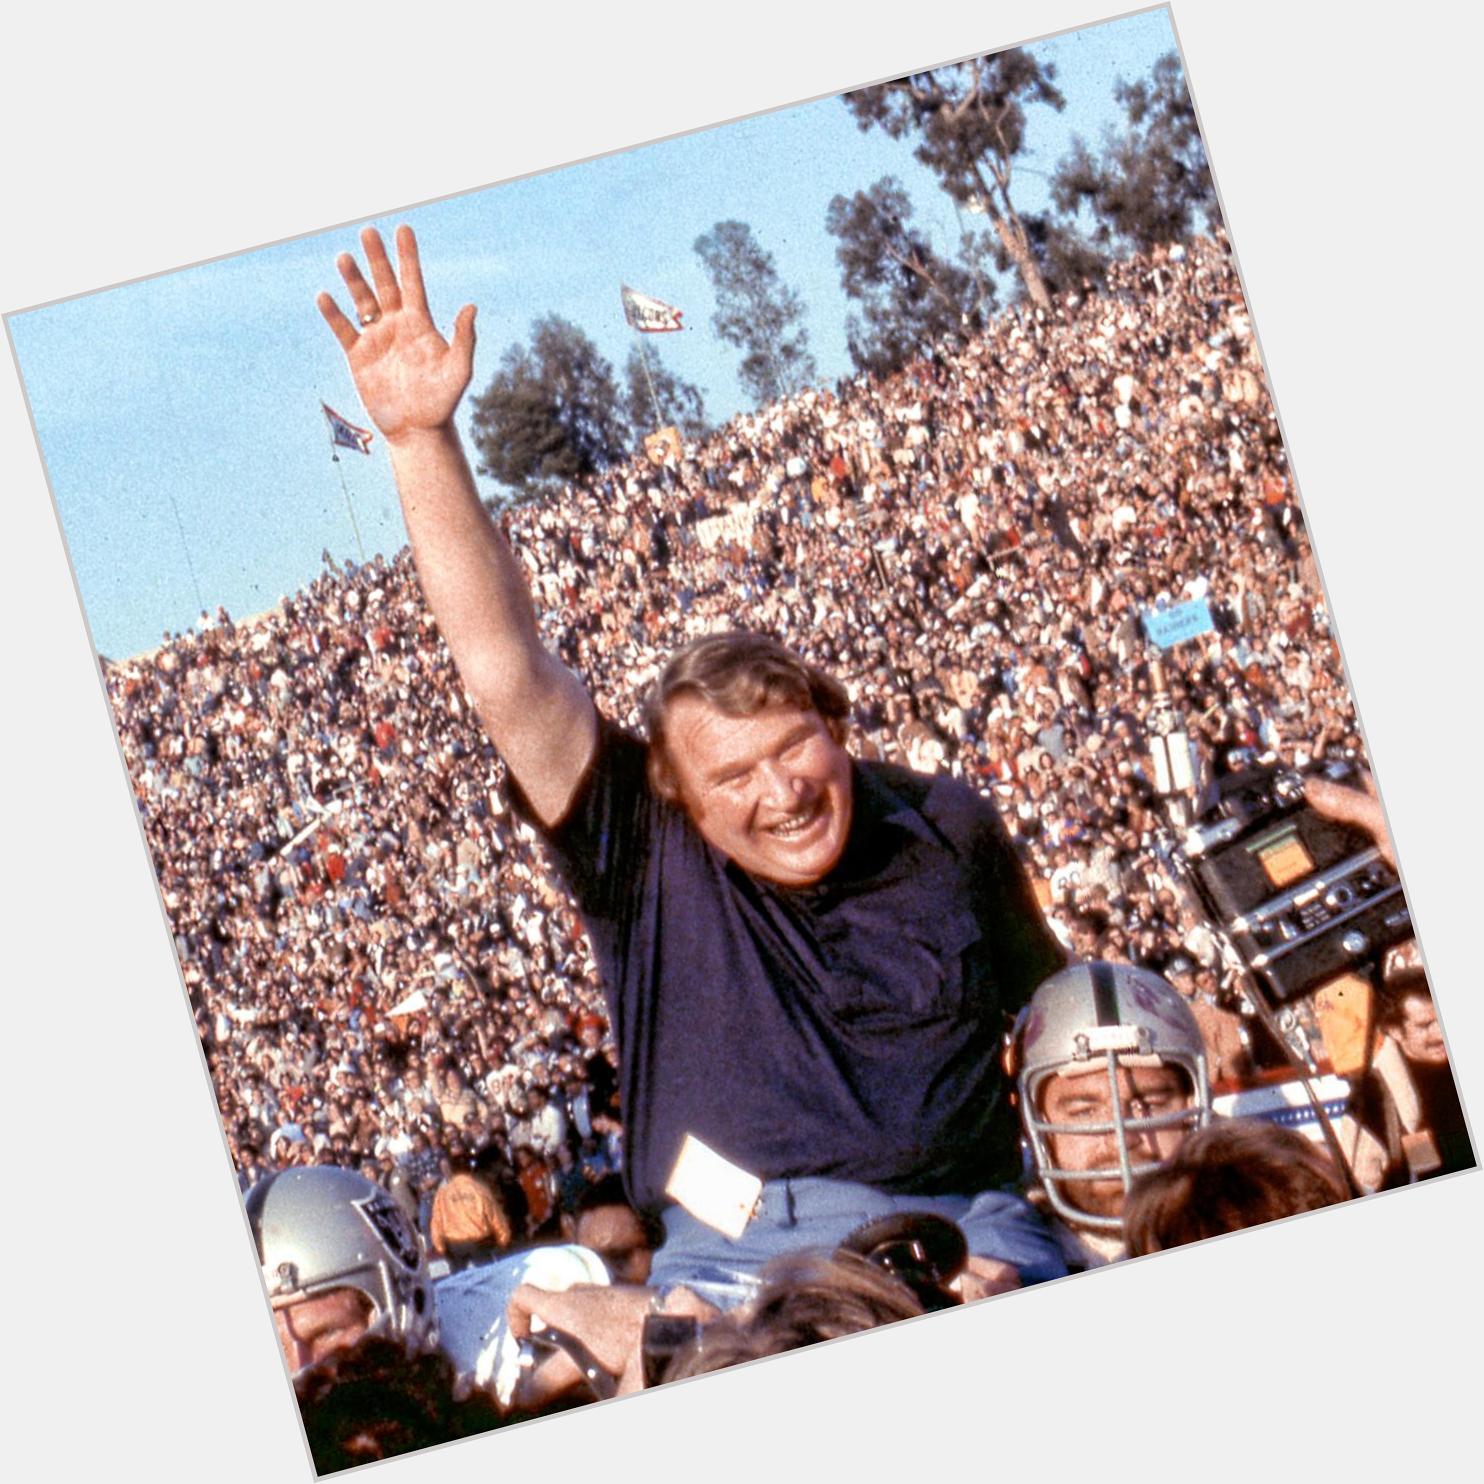 Join us in wishing the legendary John Madden a HAPPY 81st BIRTHDAY! 